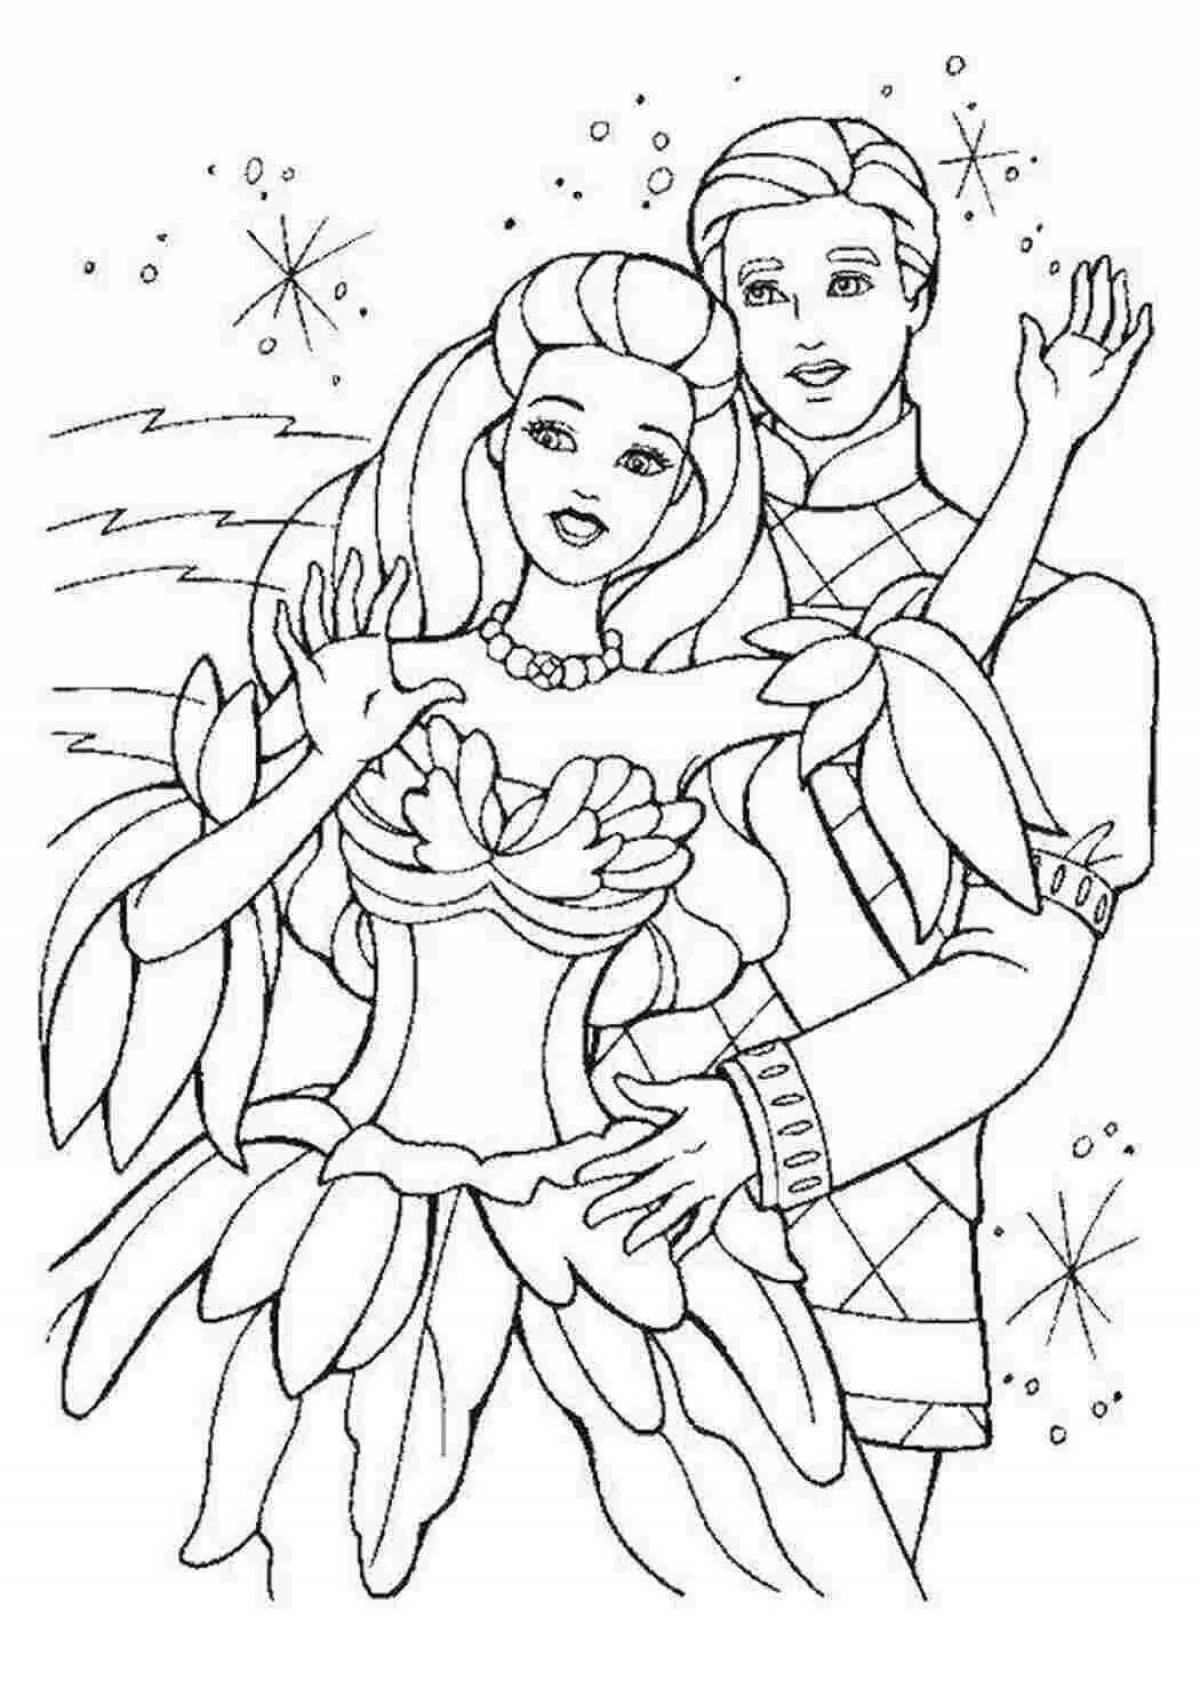 Violent coloring pages for girls barbie and princess